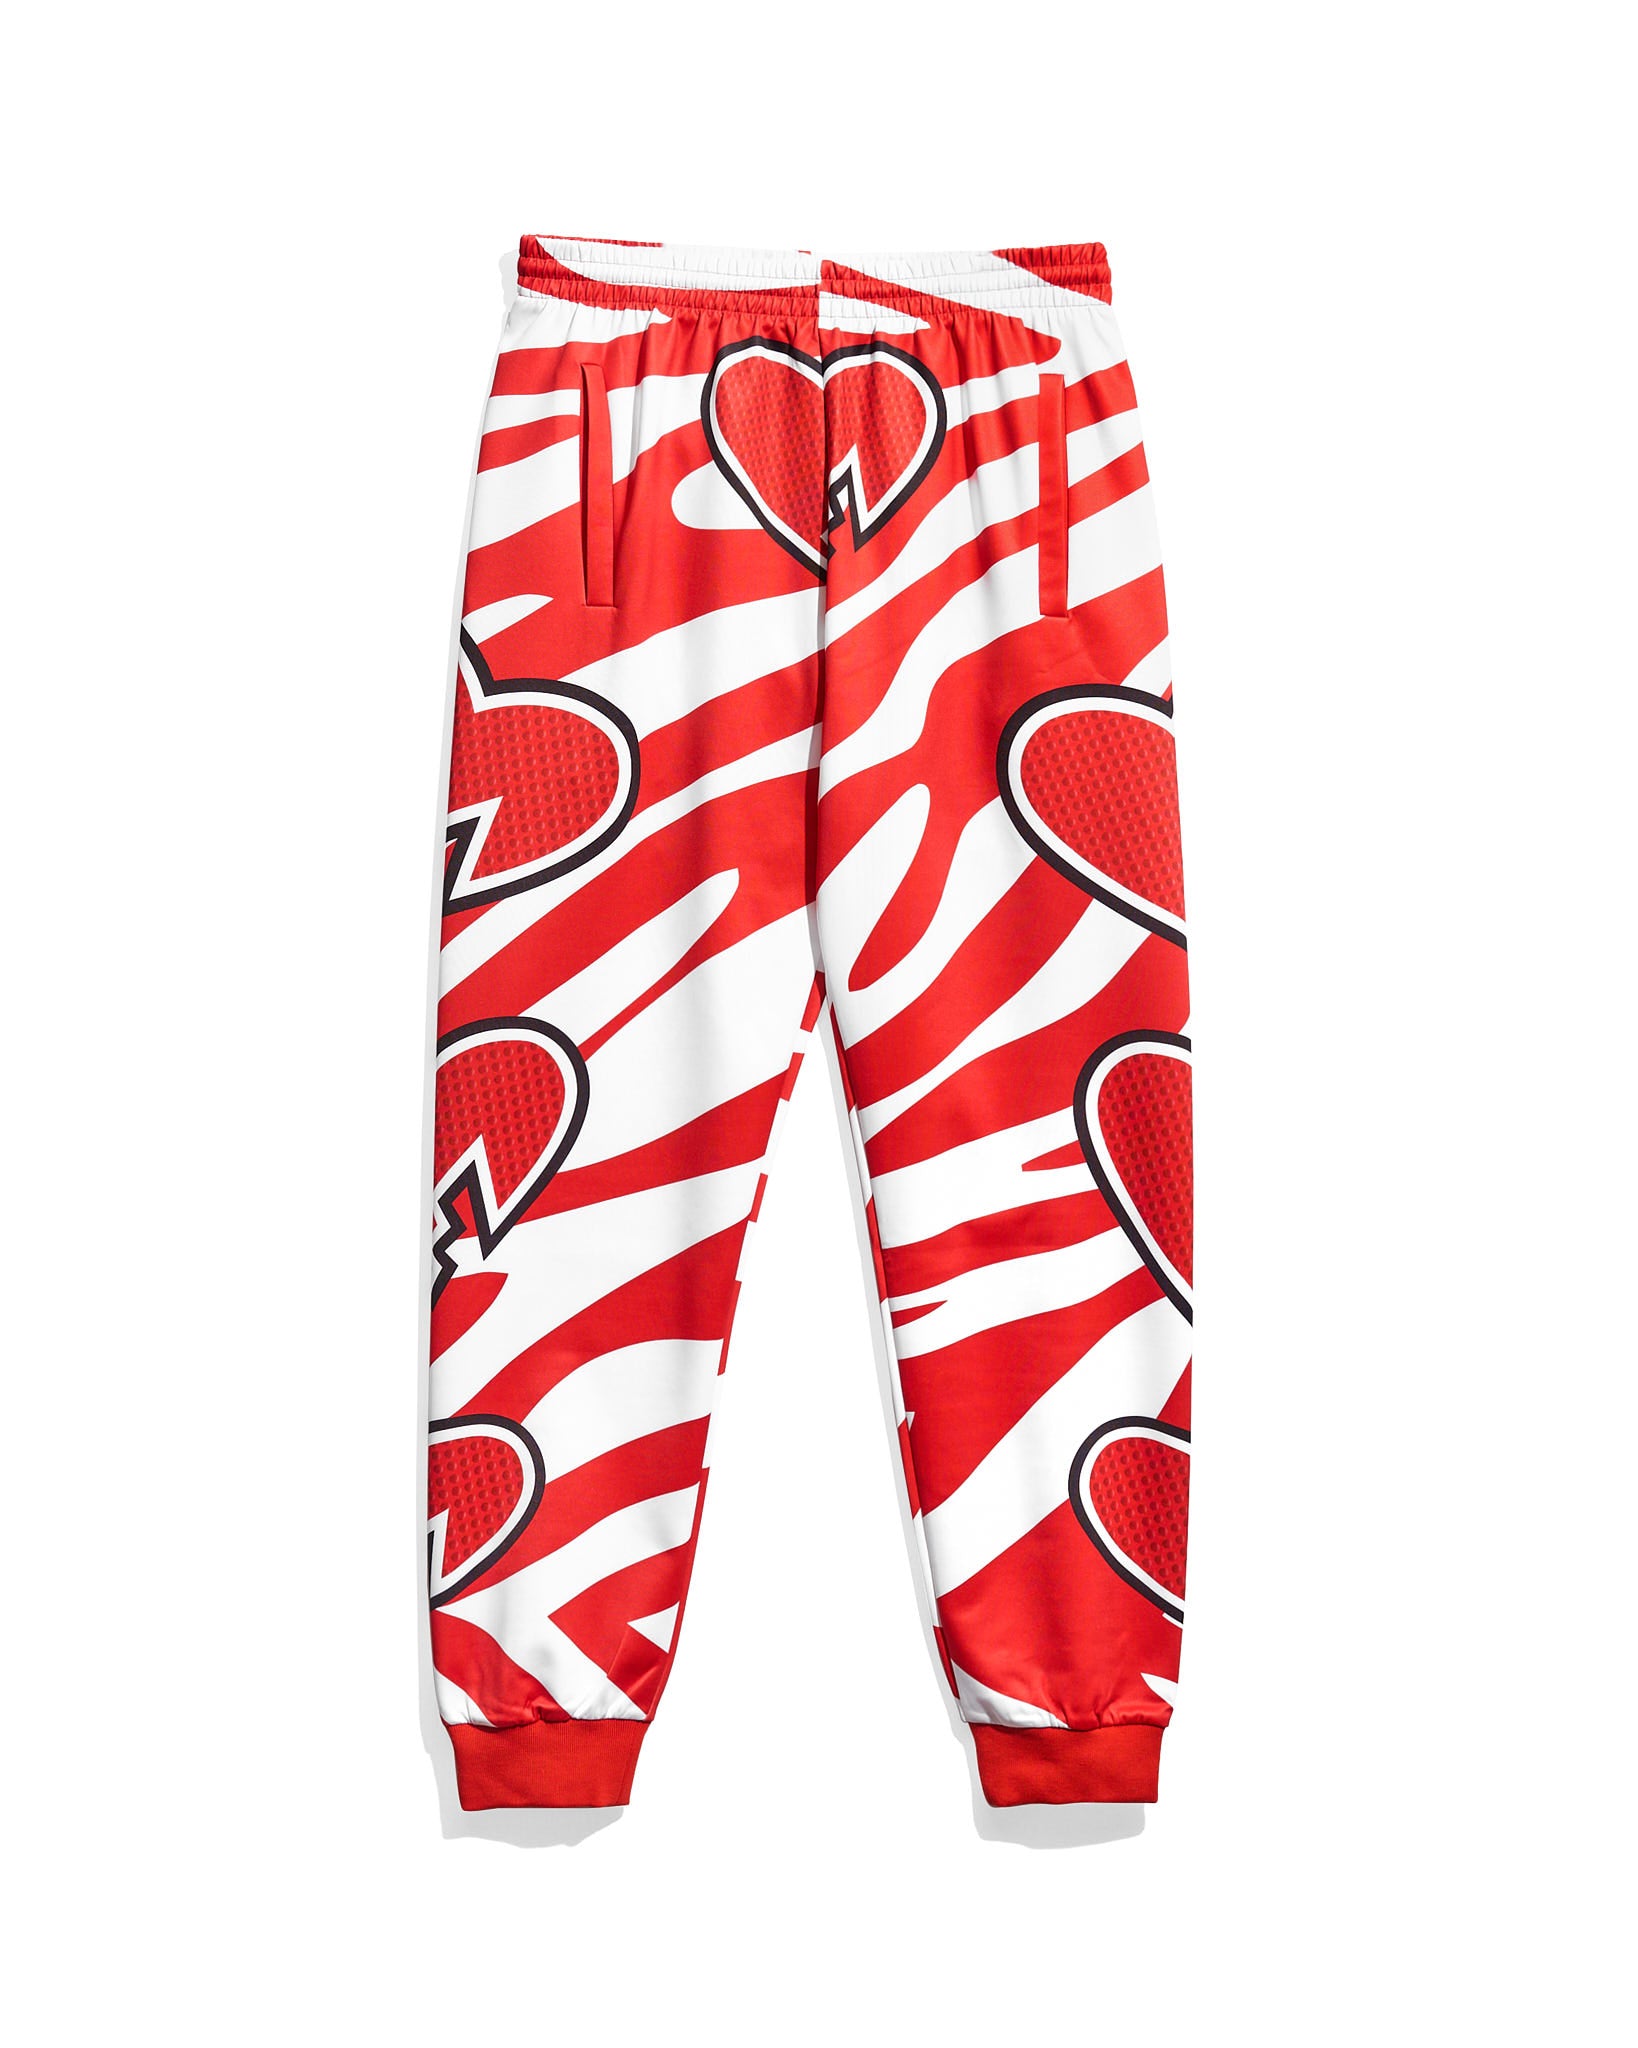 Shawn Michaels HBK One Night Only Entrance Pants